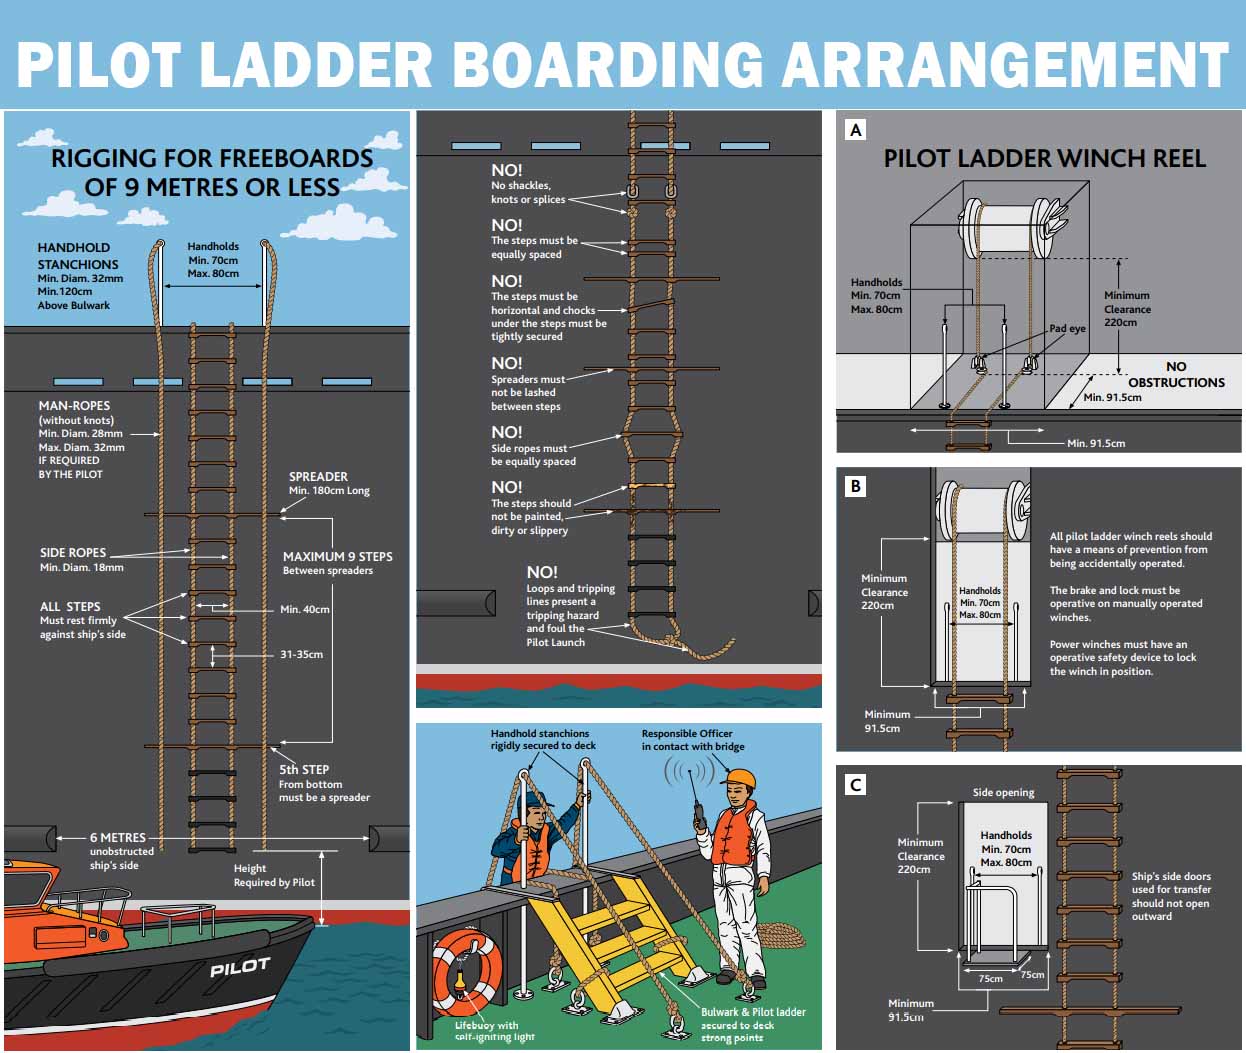 Diagram of the required boarding arrangements for pilots showing the correct method and the wrong one..